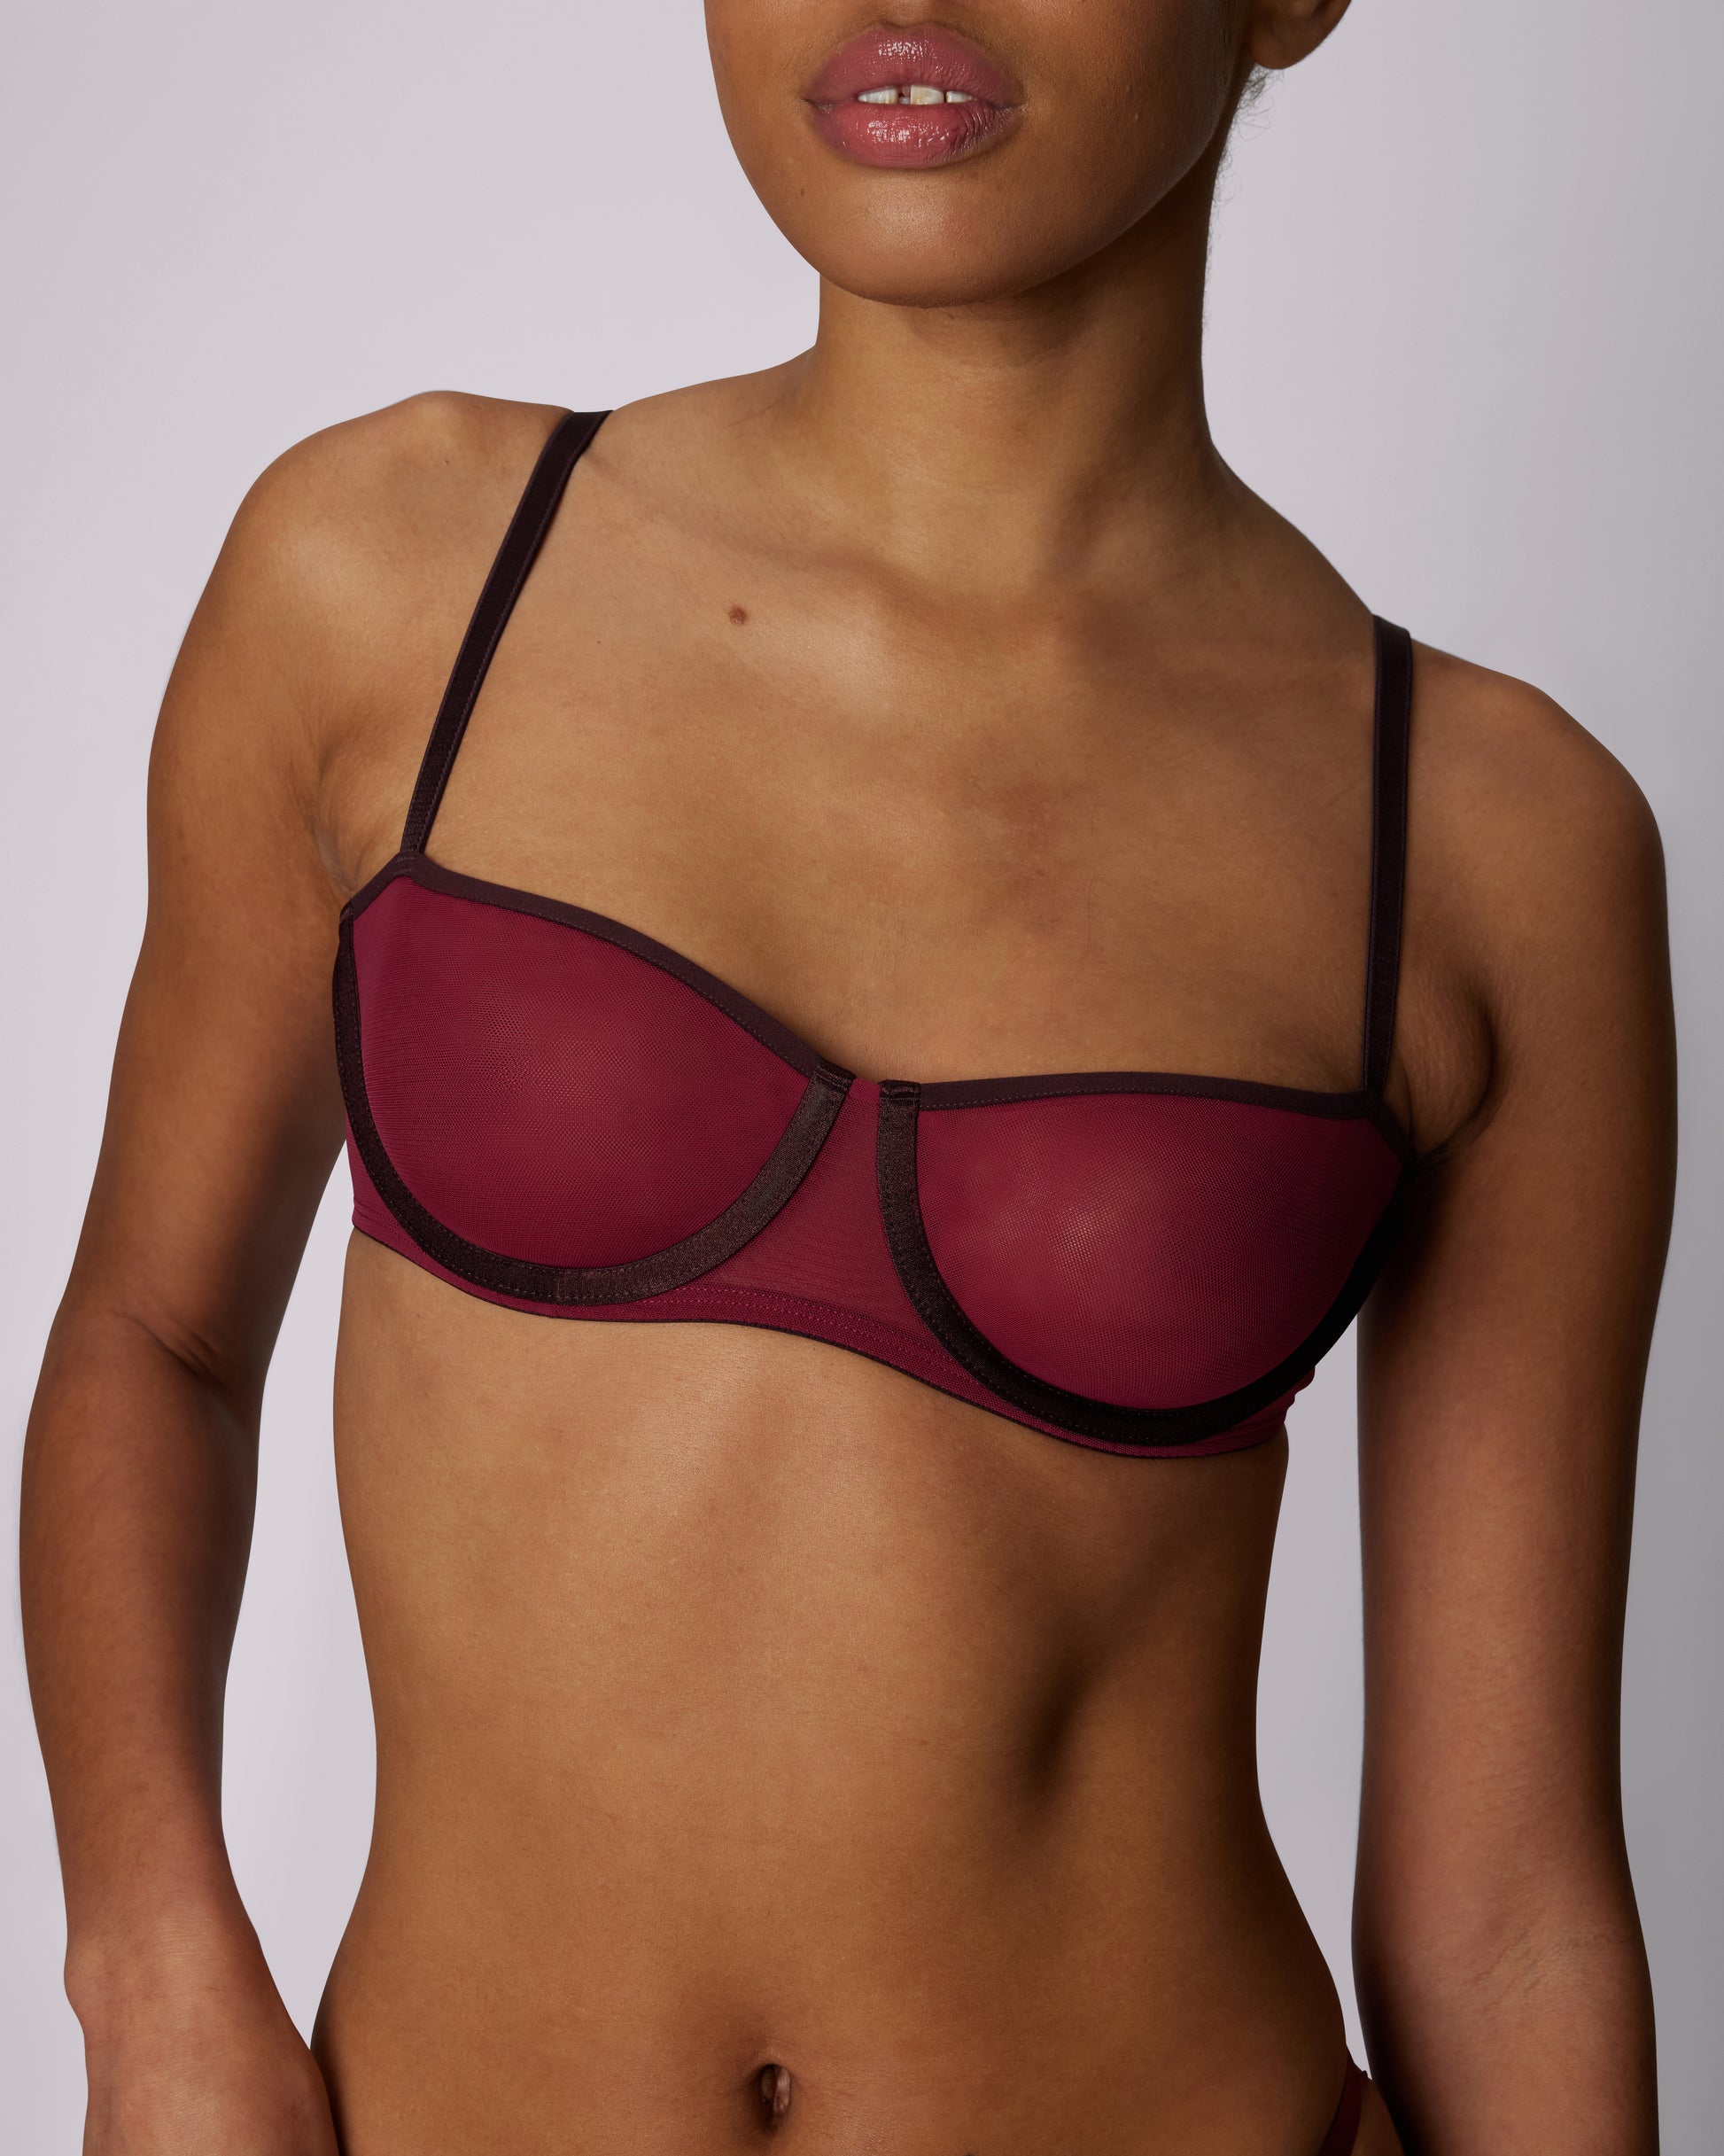 Sheer Mesh Unlined Underwire Bra - Black - Chérie Amour